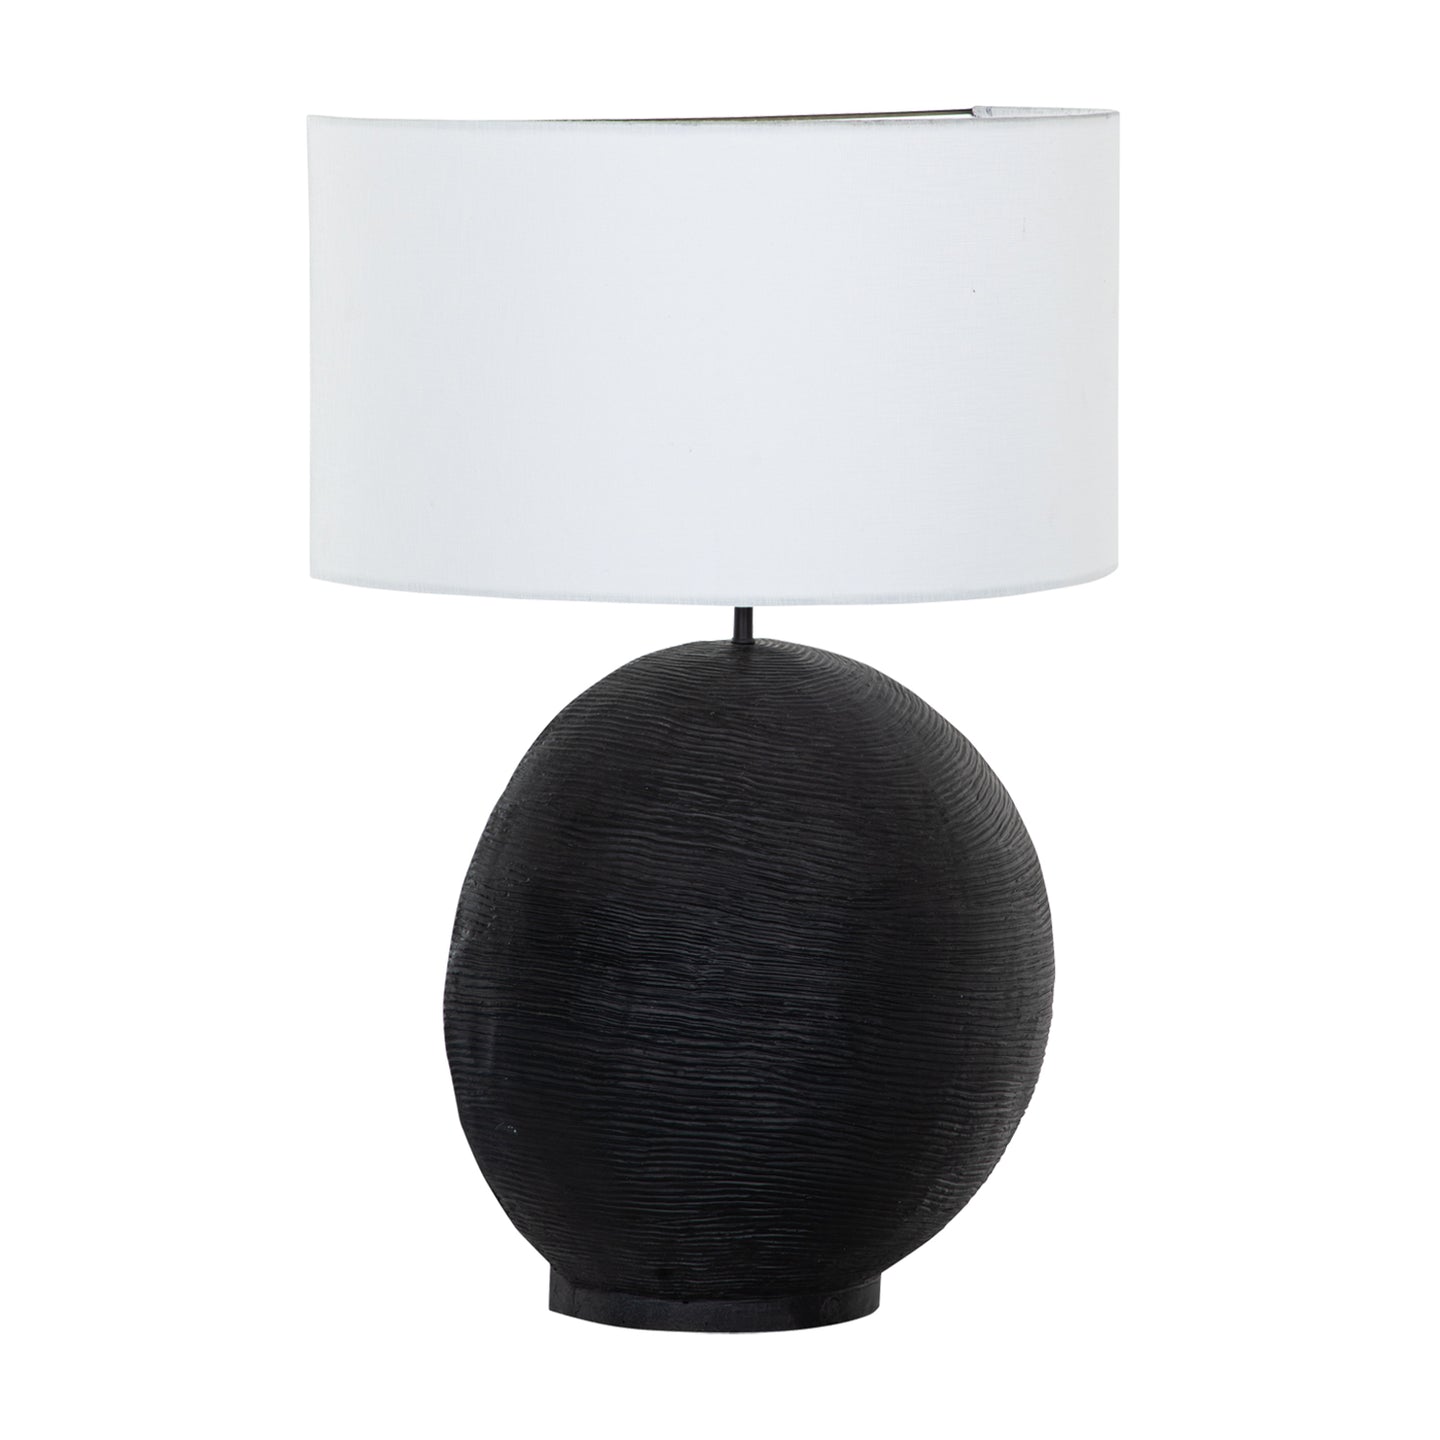 Oly Table Lamp